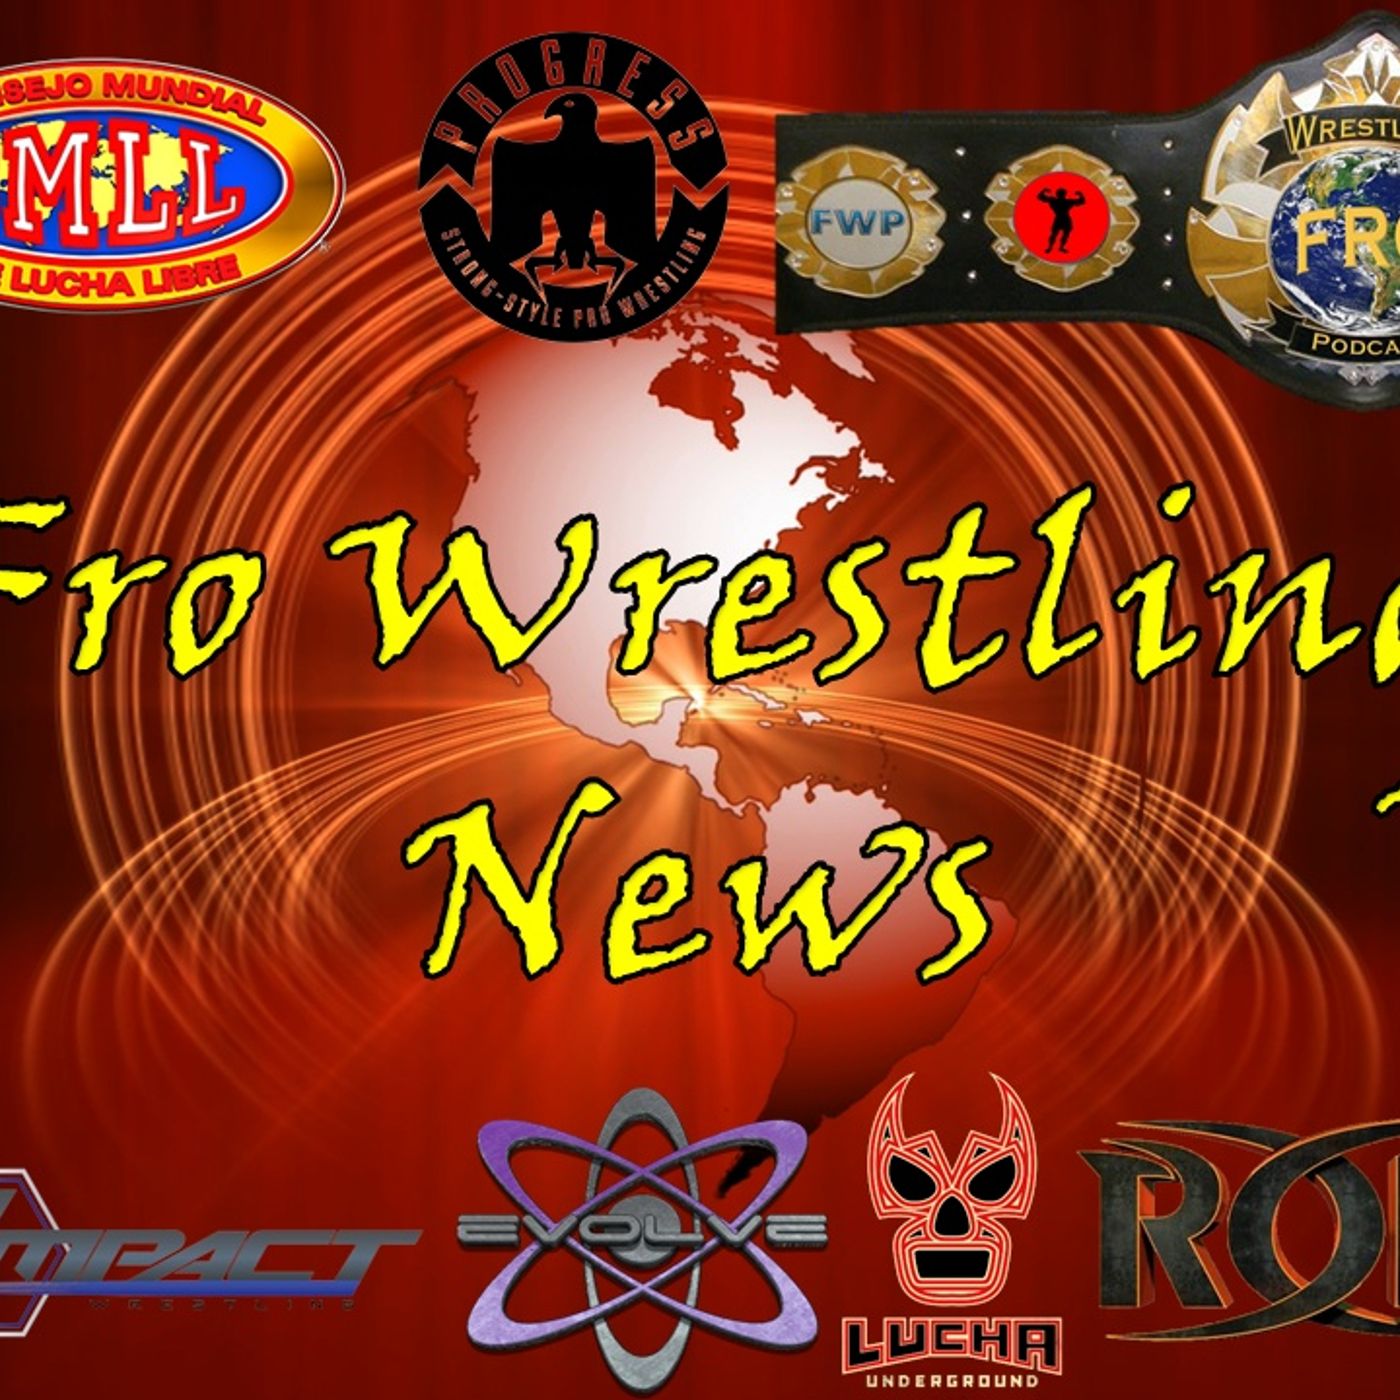 Fro Wrestling News - Who is Favored to Win the Royal Rumble